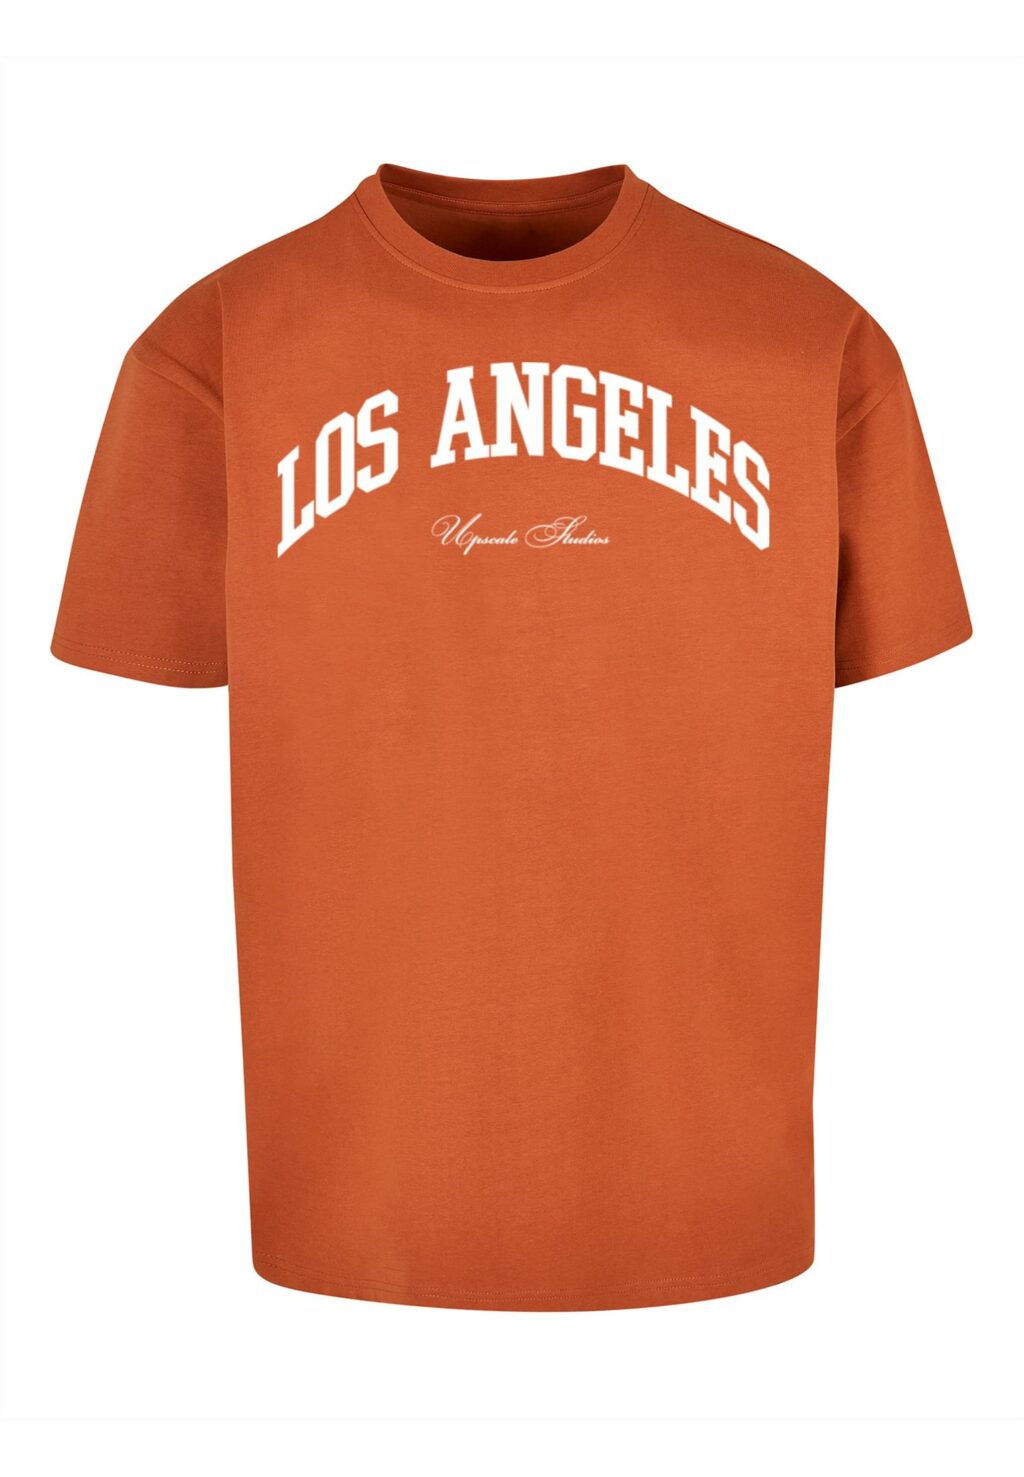 L.A. College Oversize Tee toffee MT2462